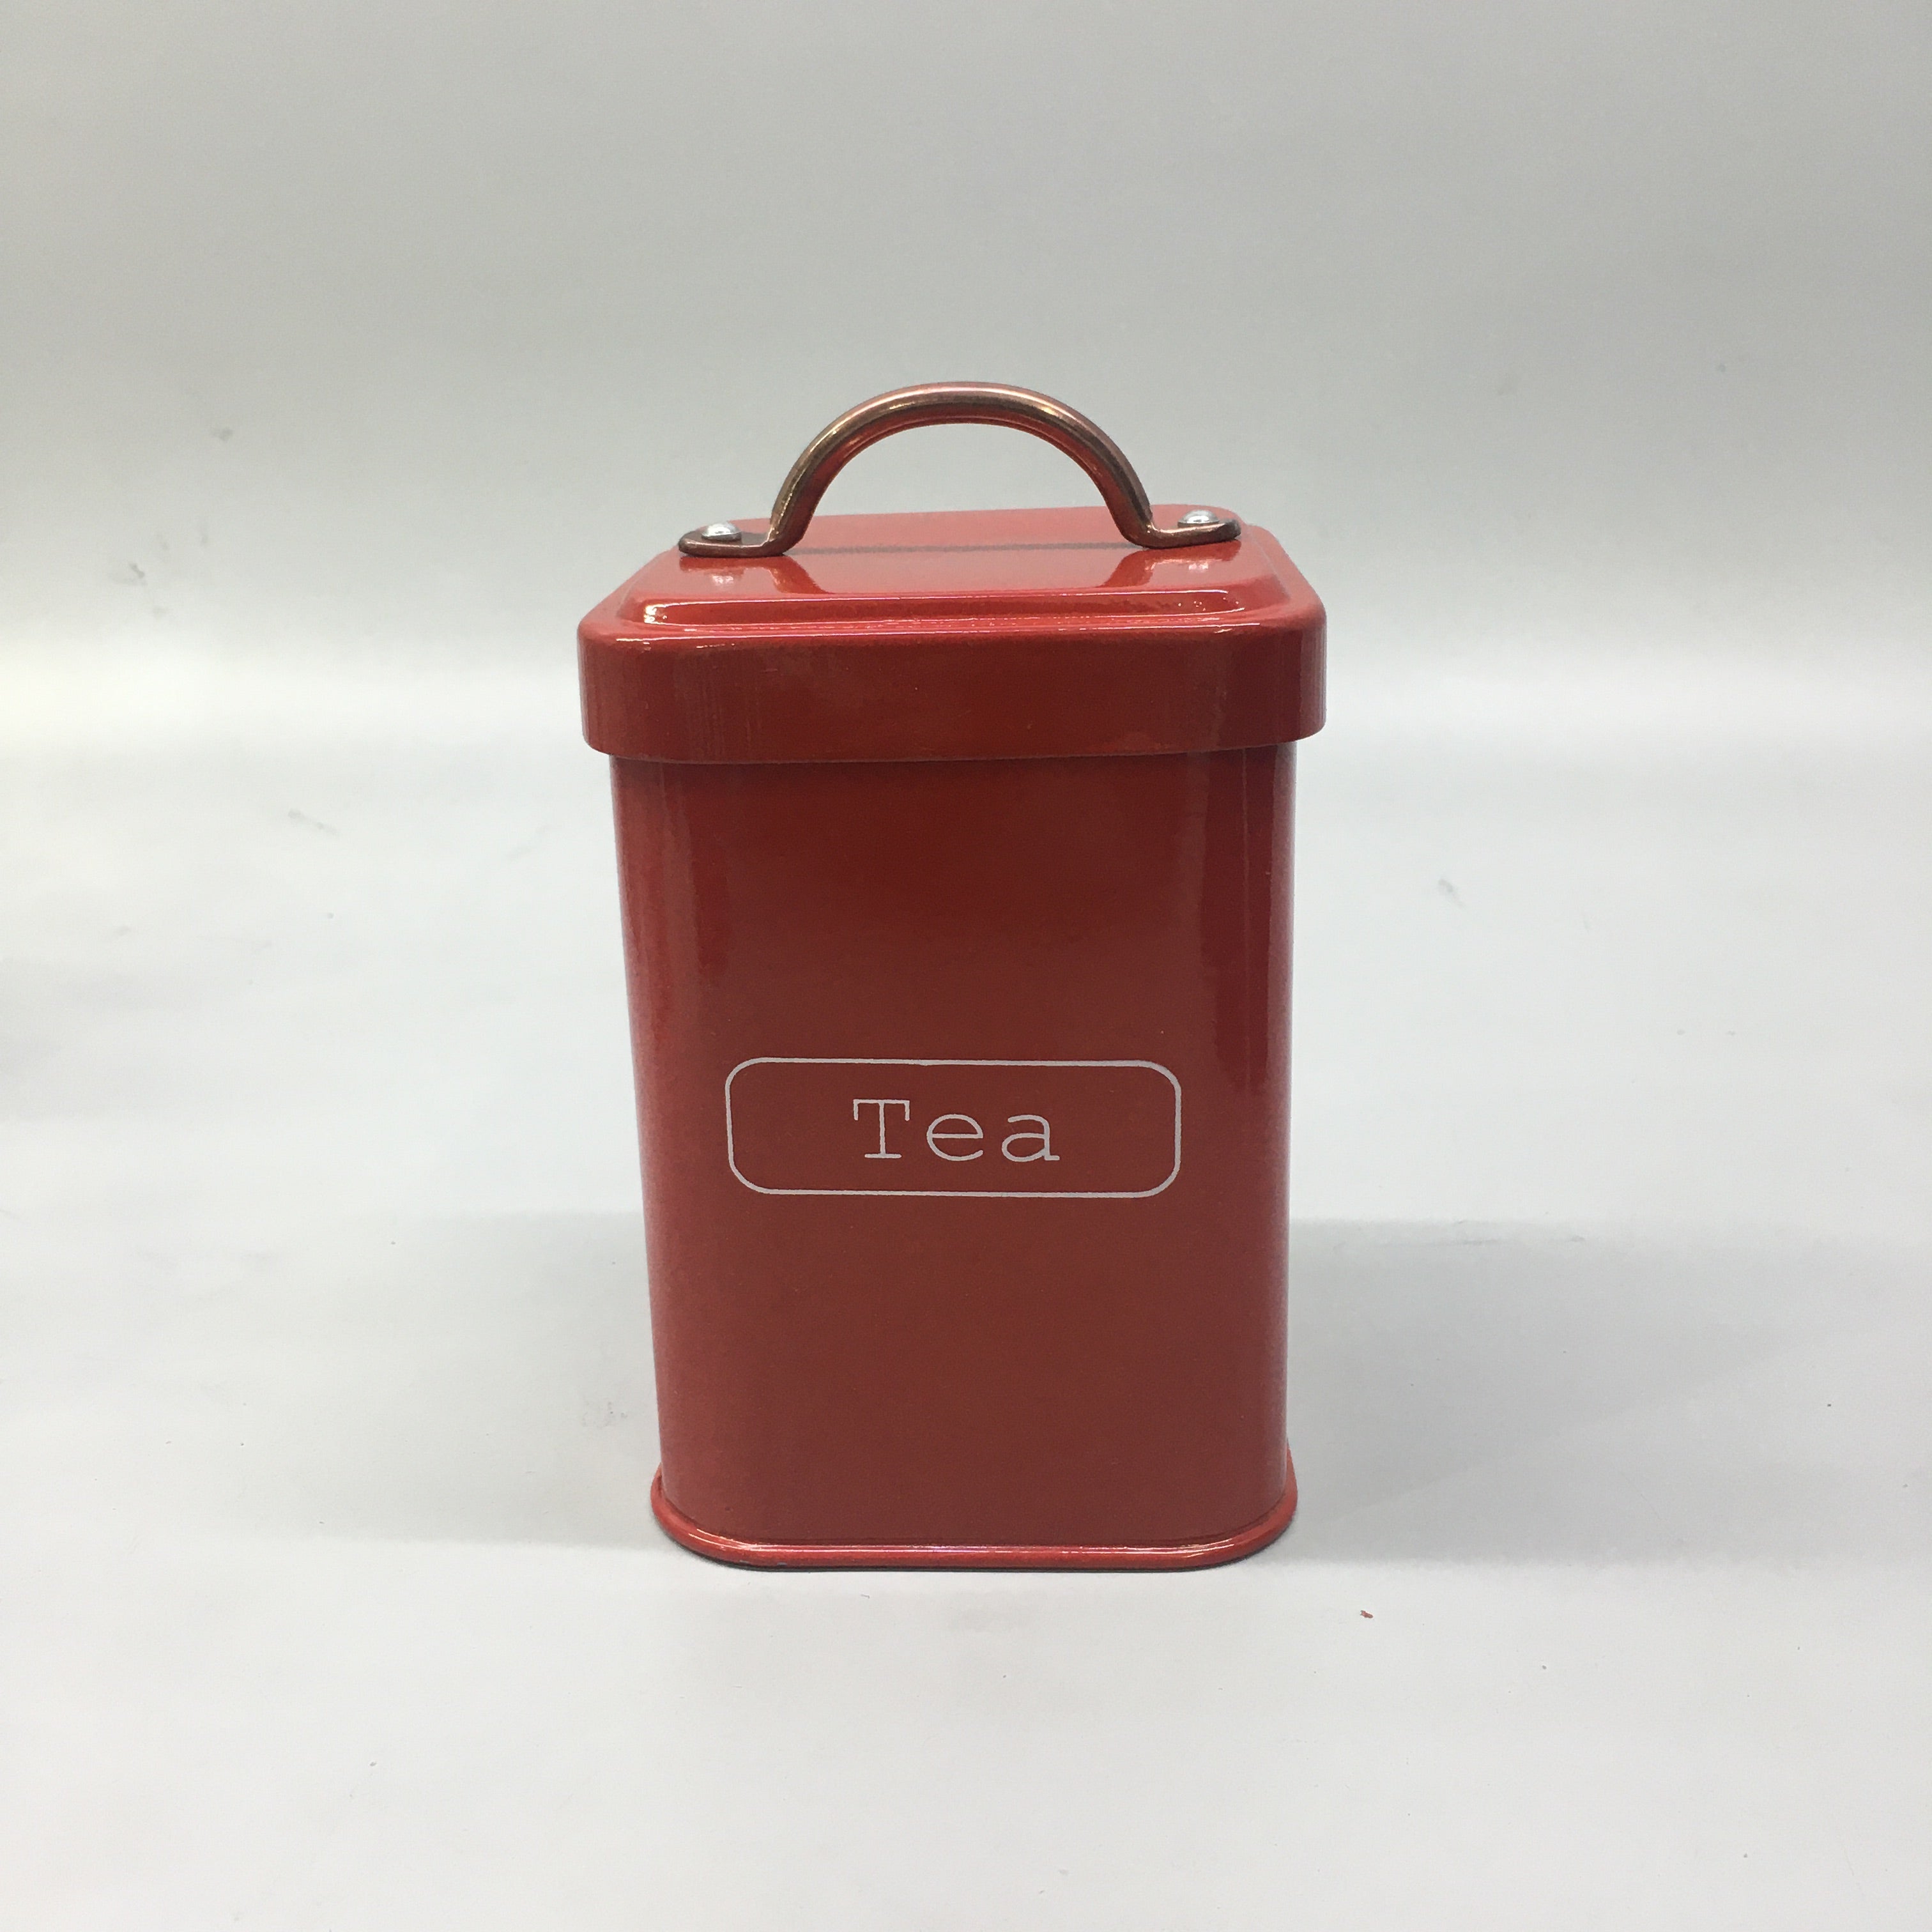 Vintage Tin Canister Set Square Tea Coffee Sugar Red with Bronze Handle 11x11x16.50cm